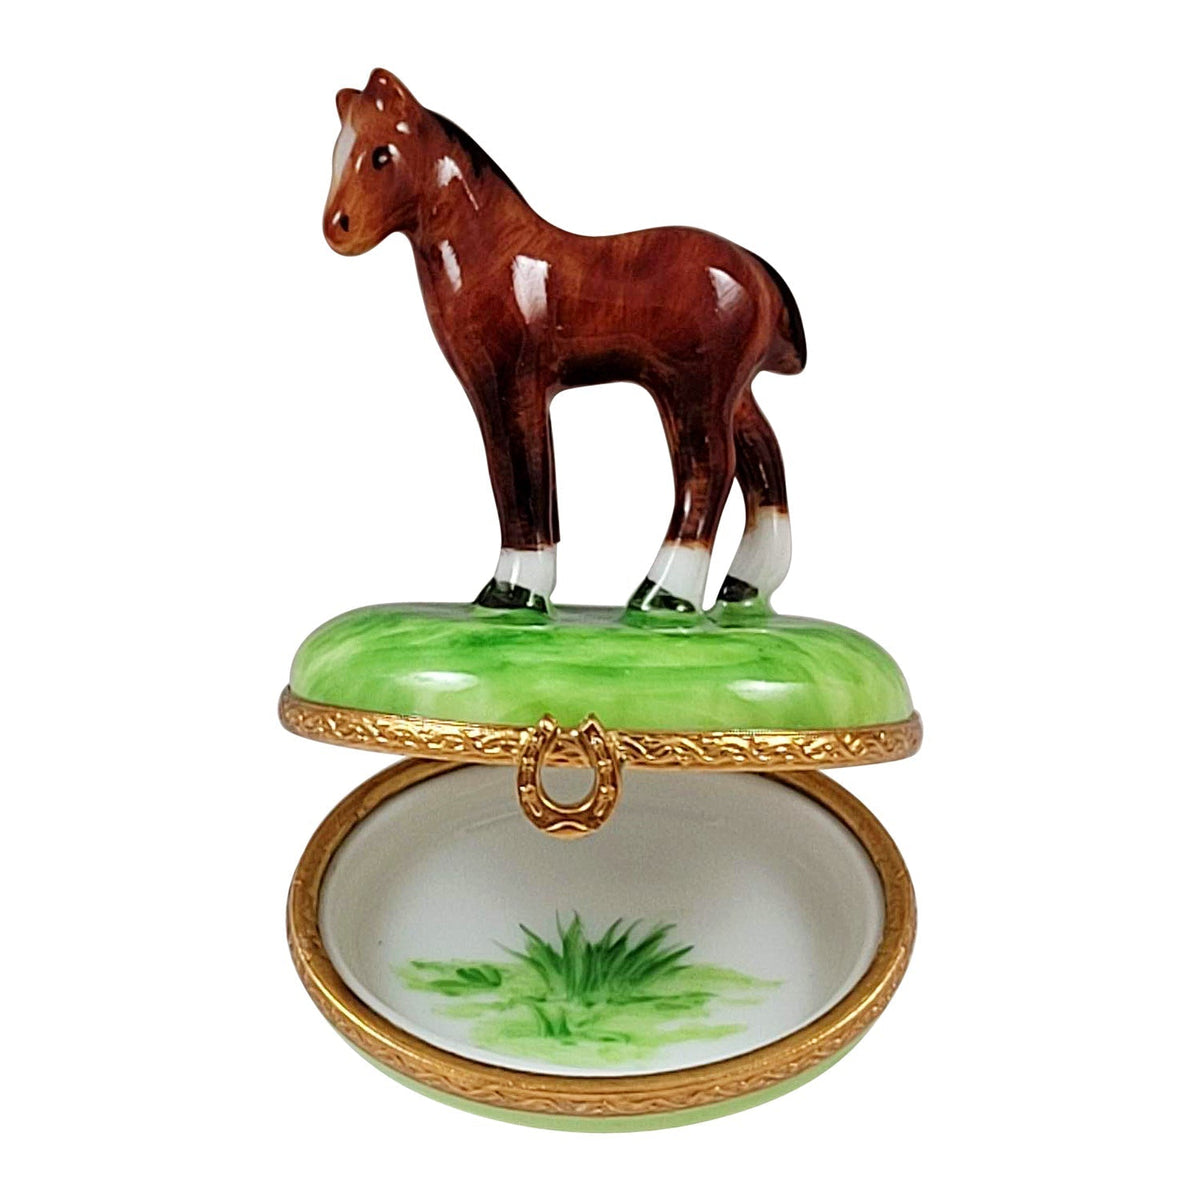 Standing Mini Horse with a Removable Brass Horseshoe